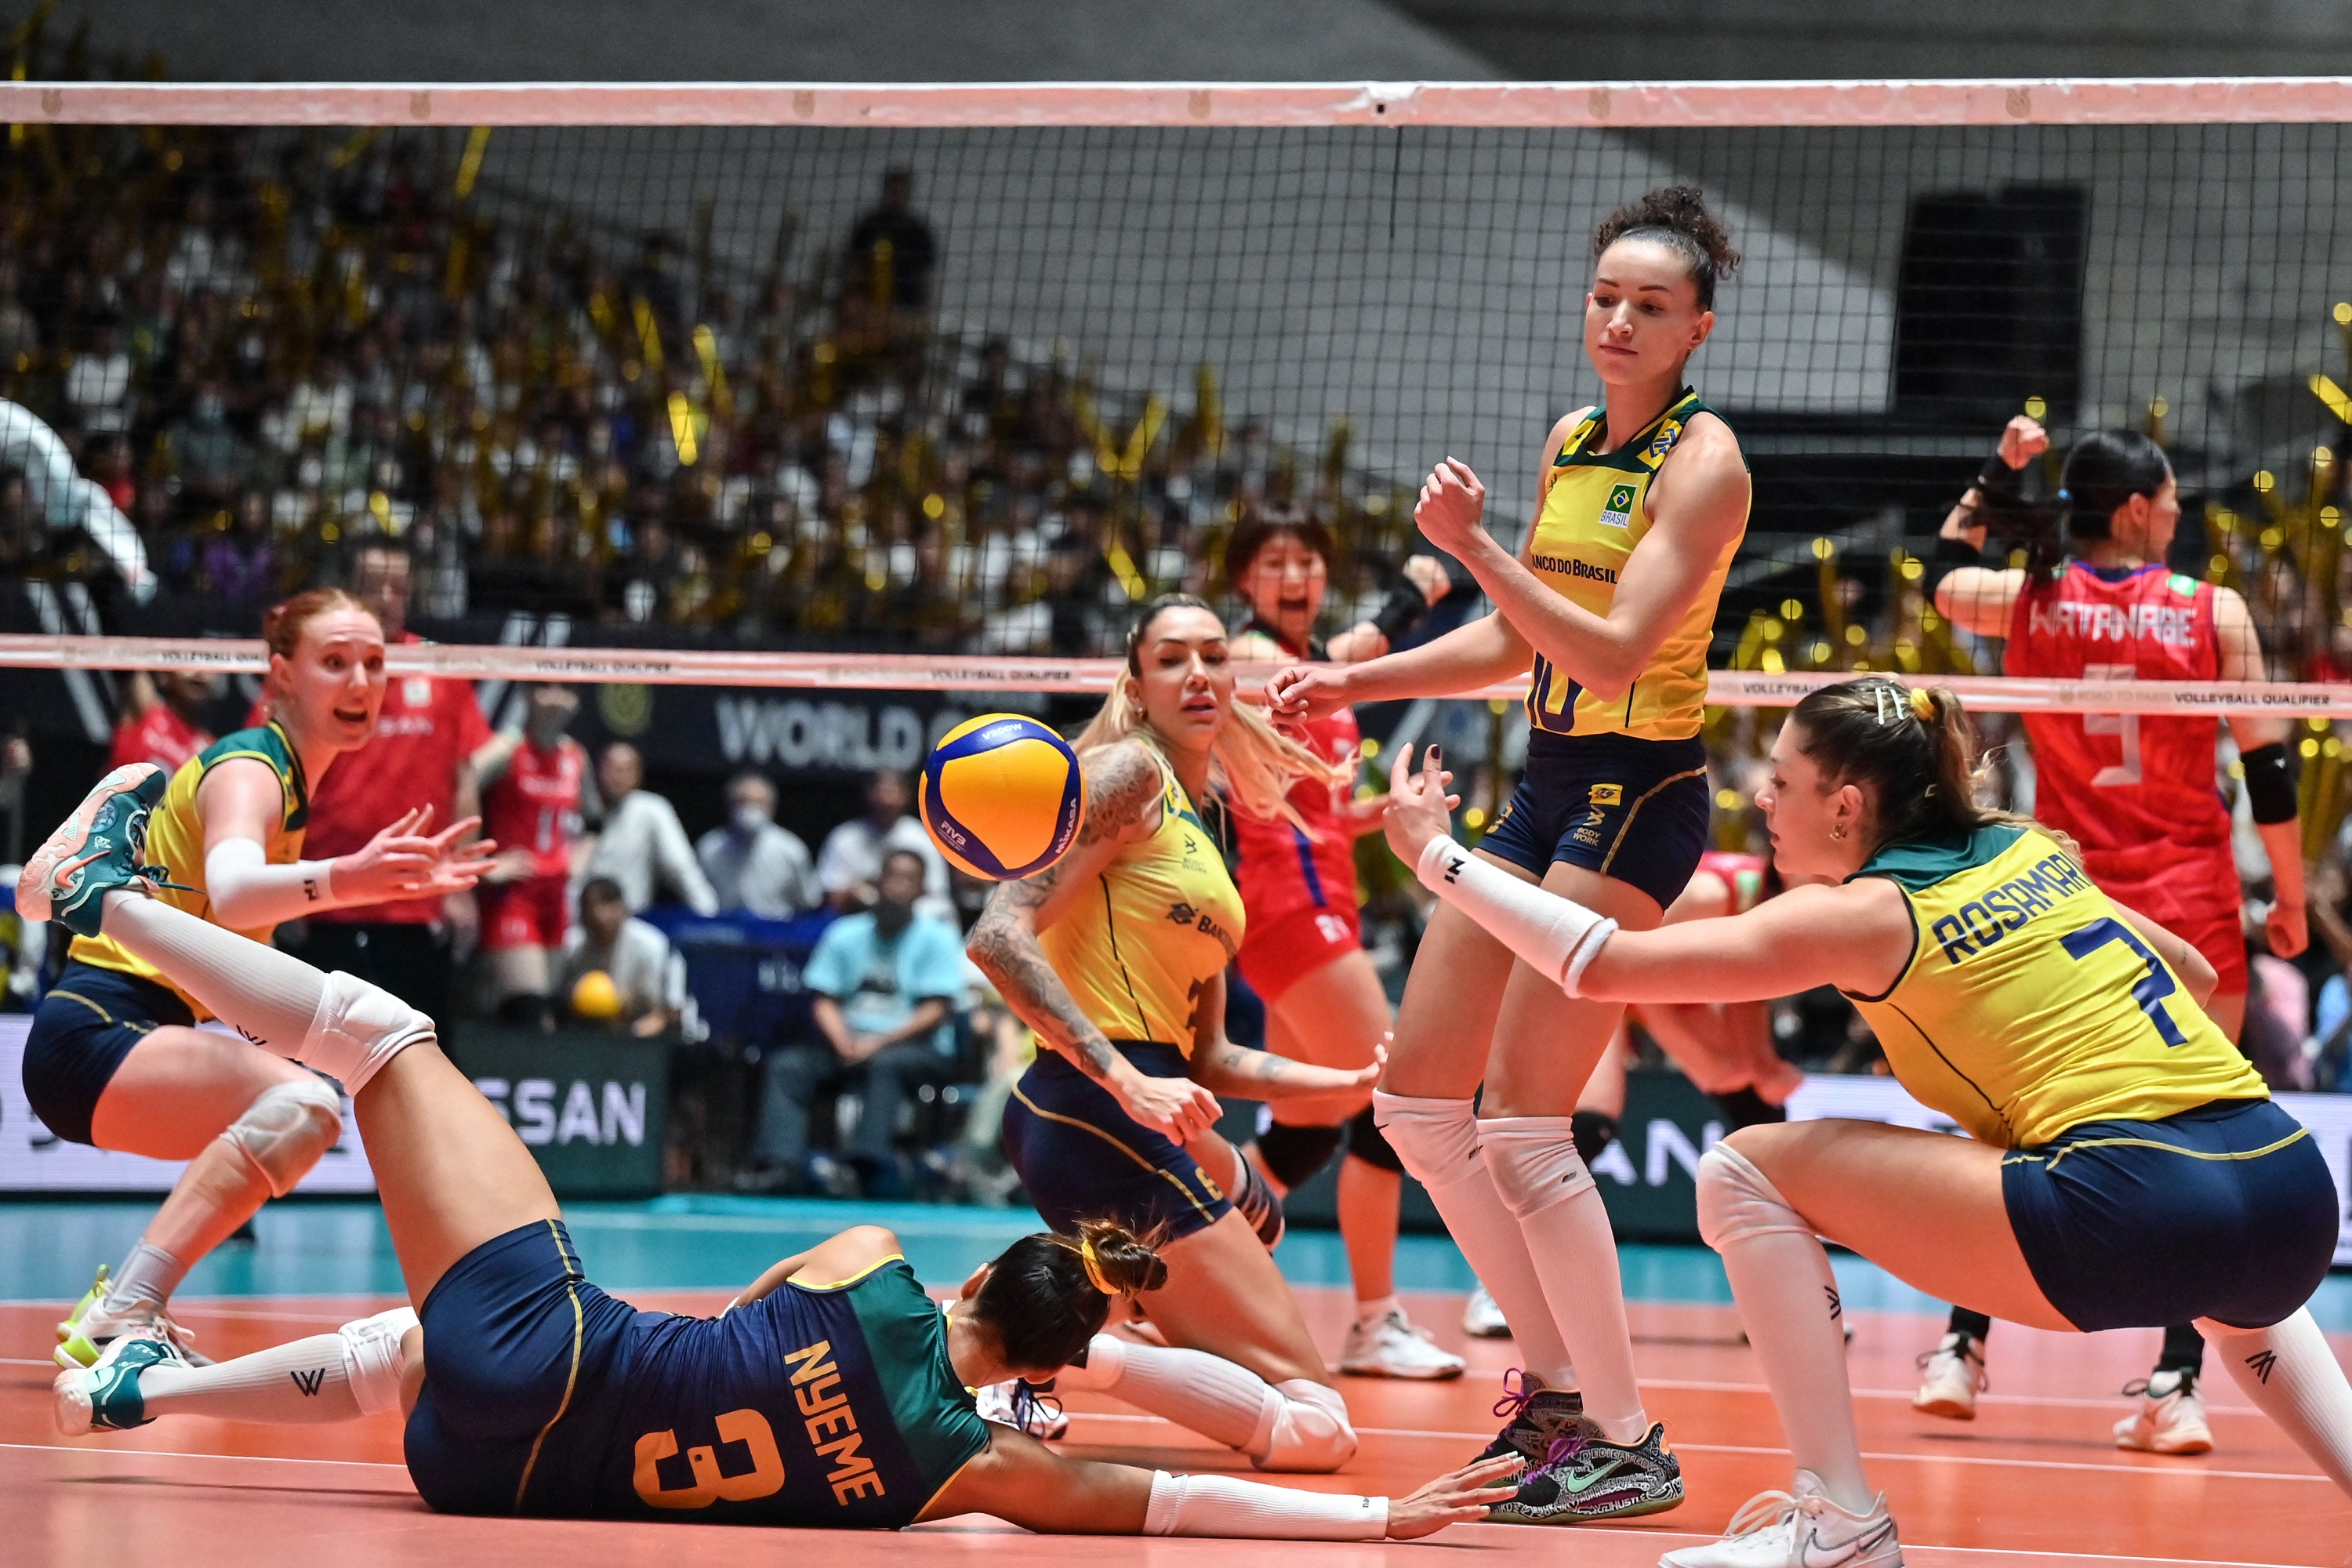 Brazil's Victoria Alexandre Costa Nunes Nyeme (bottom L-#3) dives to attempt a return during the match on the final day of the Volleyball World Cup 2023 women's Olympic qualifying tournament between Japan and Brazil at Yoyogi National Stadium in Tokyo on September 24, 2023. (Photo by Richard A. Brooks / AFP)